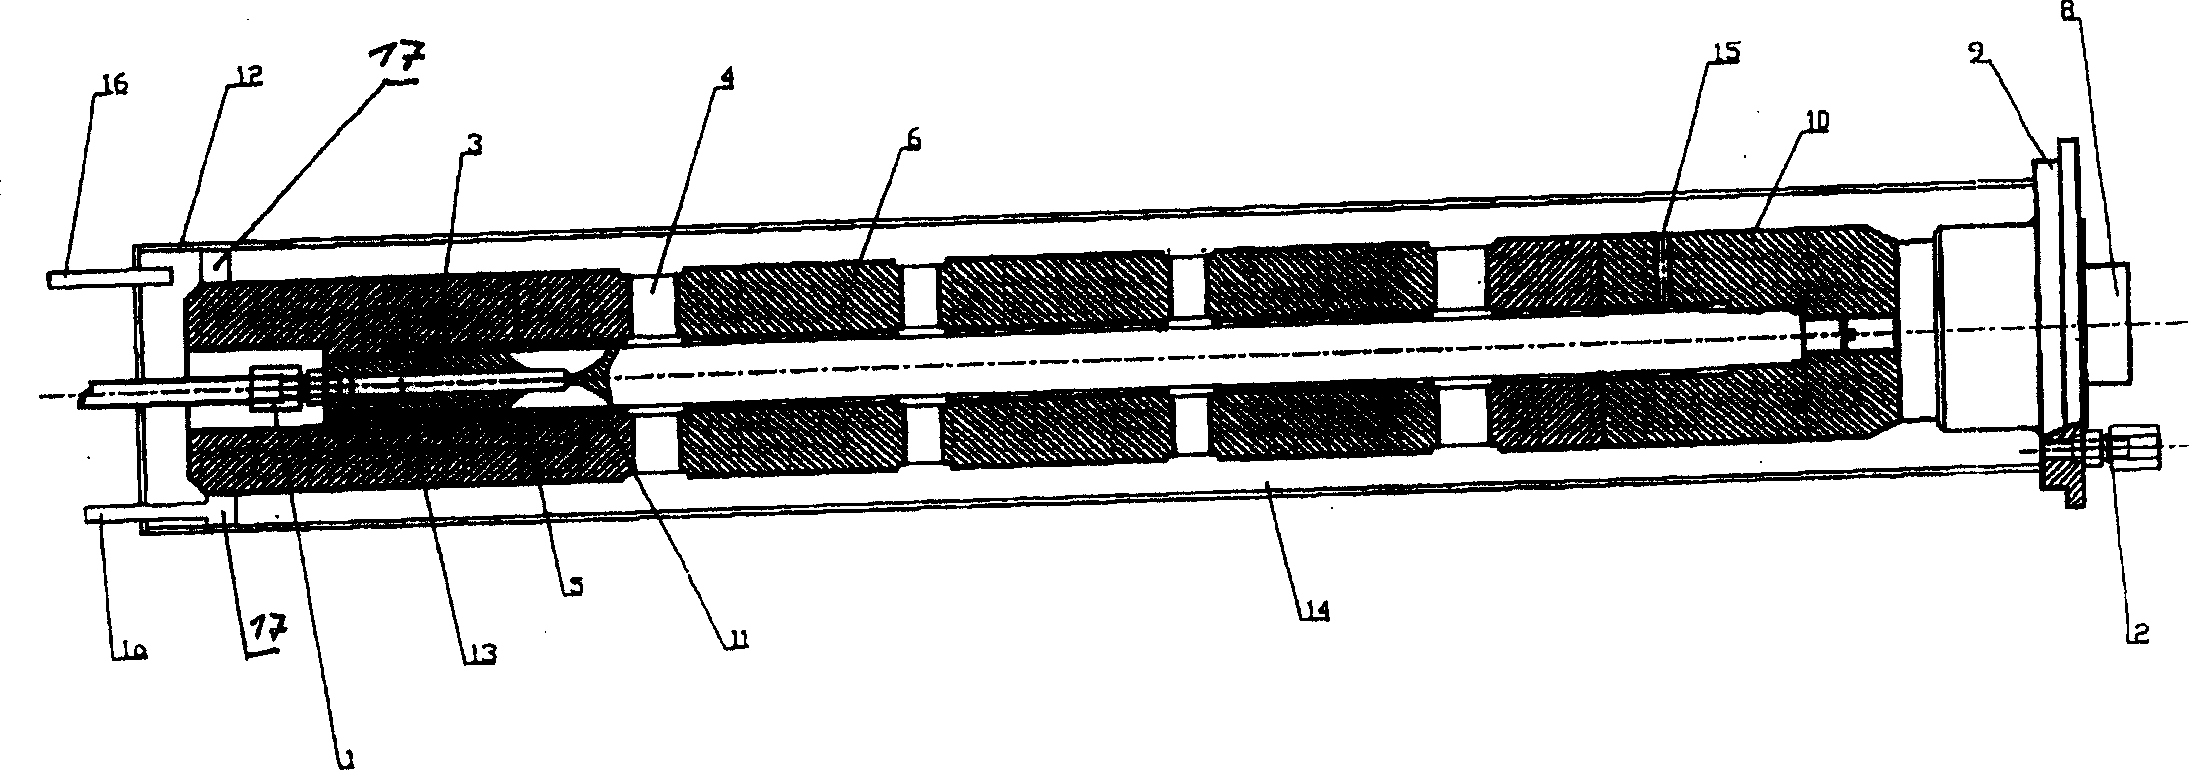 Method and device for cooling ultrasonic transducers